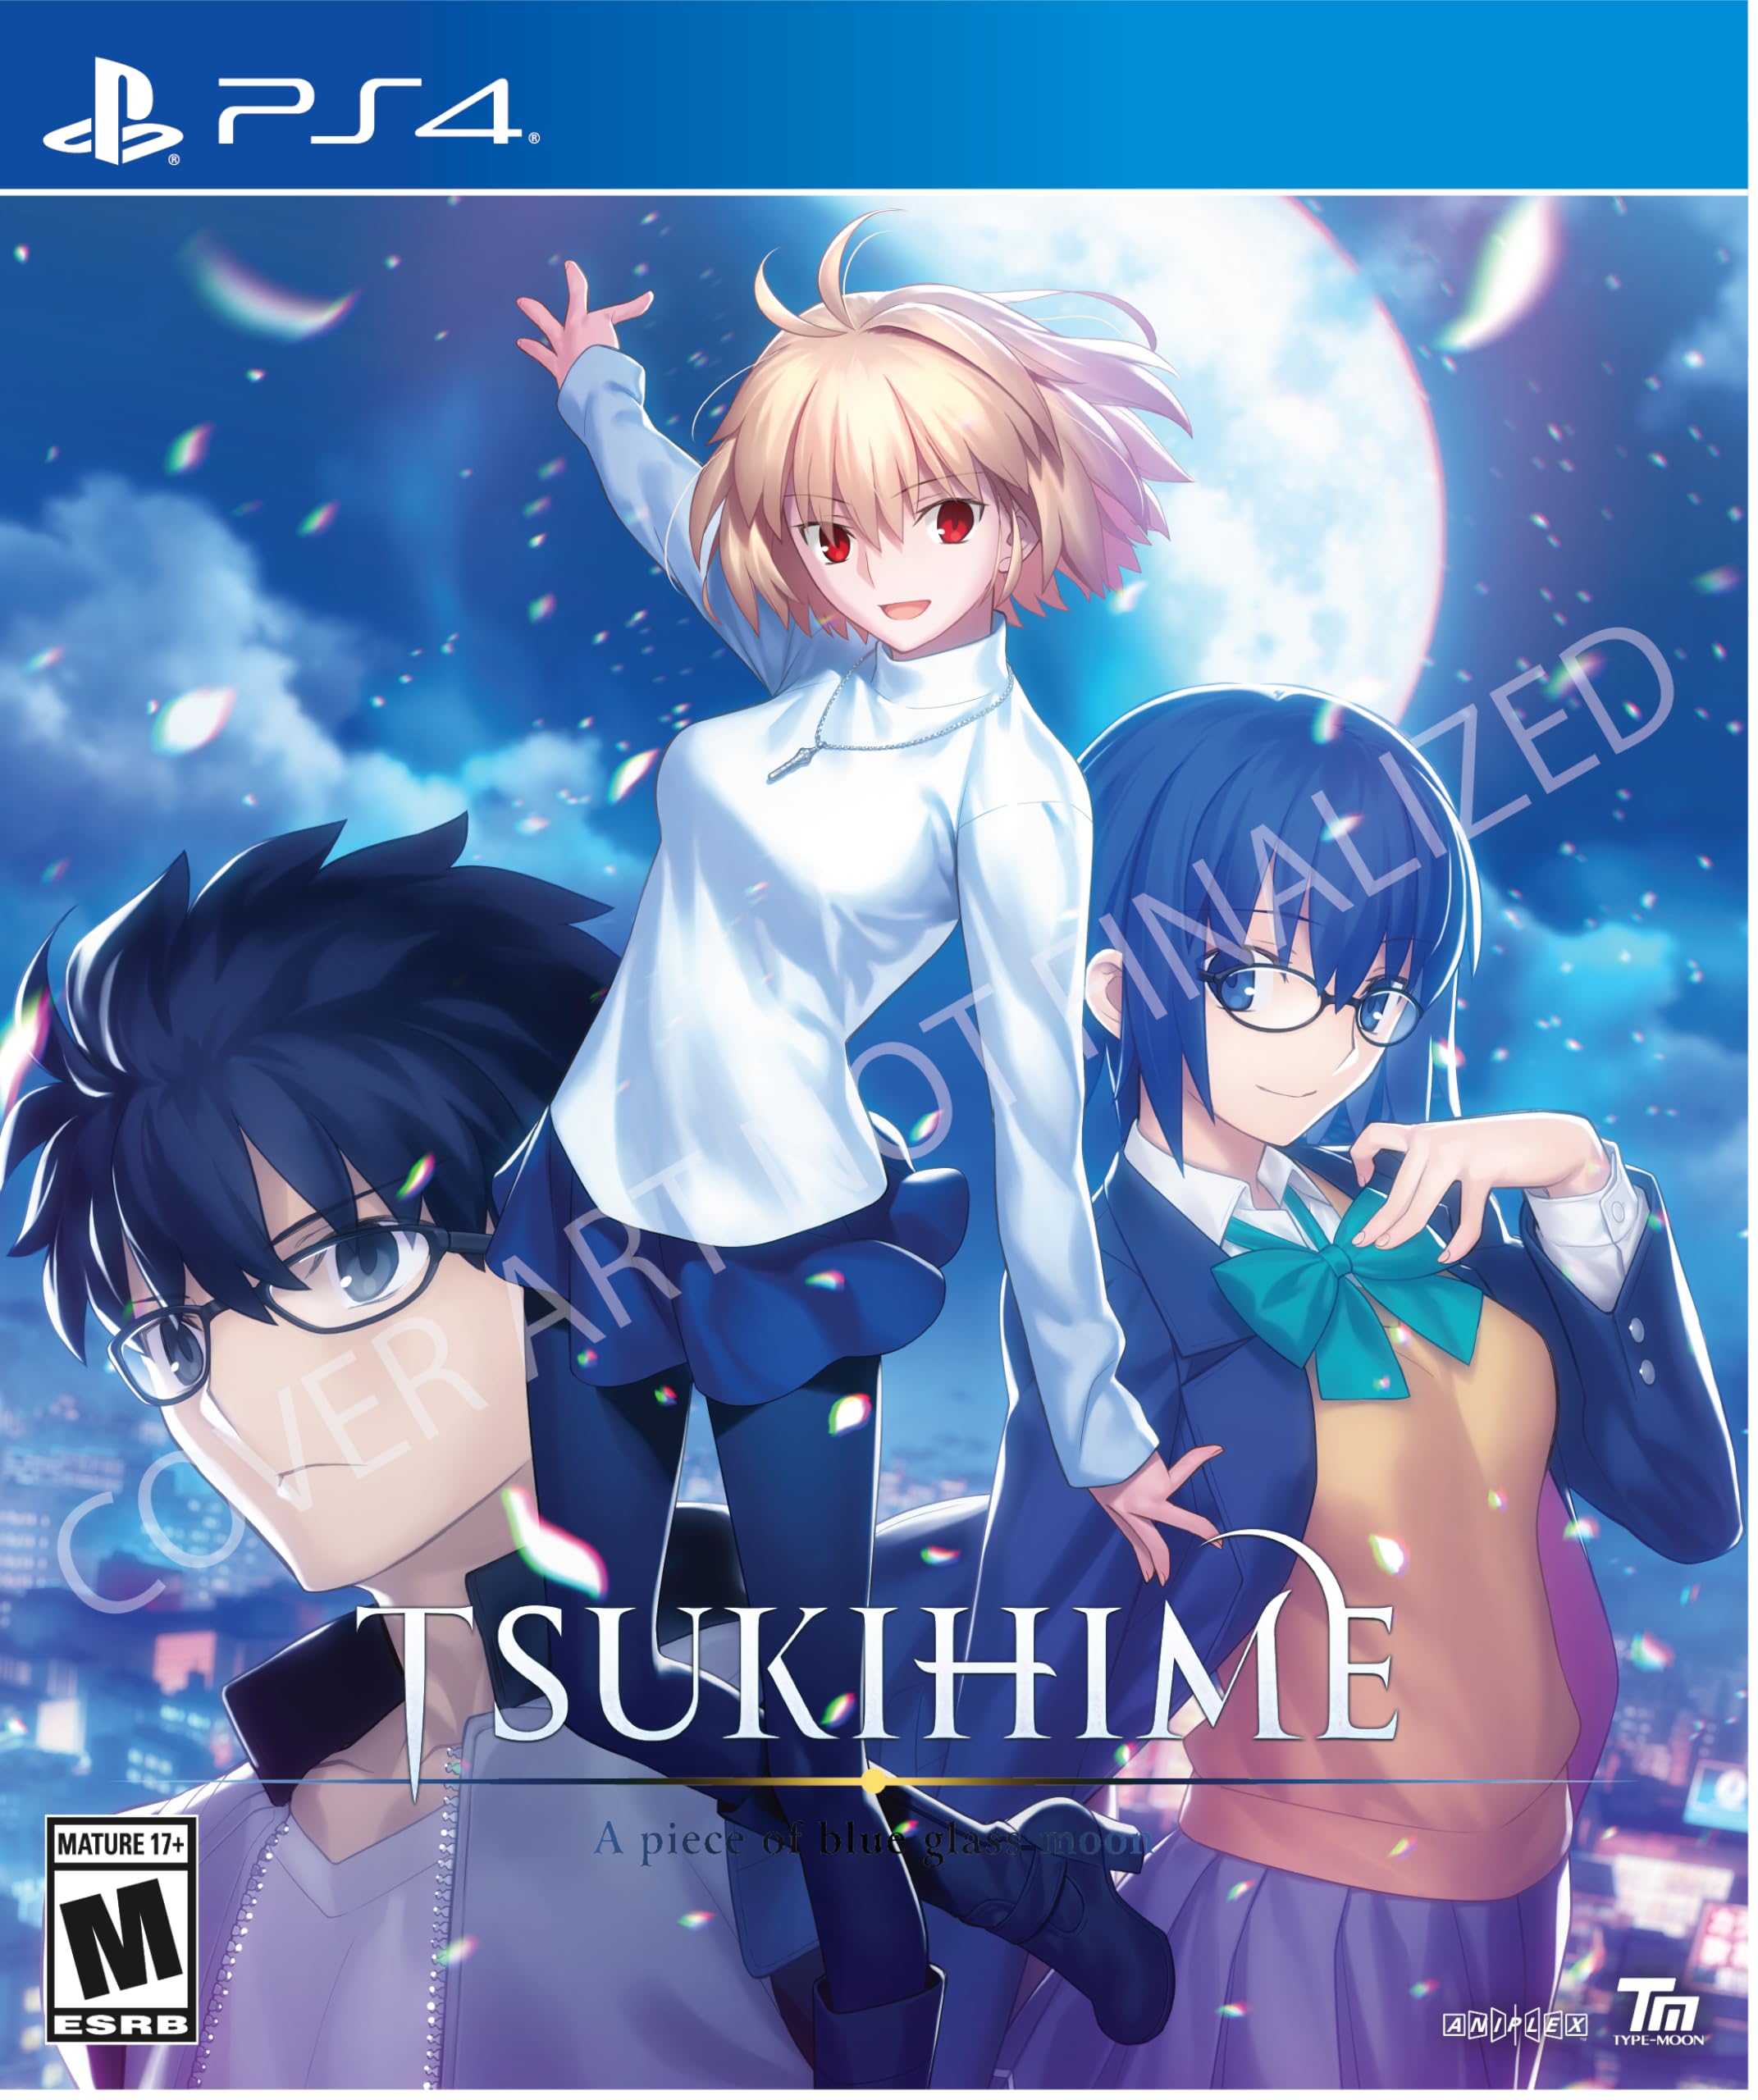 TSUKIHIME: A piece of blue glass moon: Limited Edition - PlayStation 4